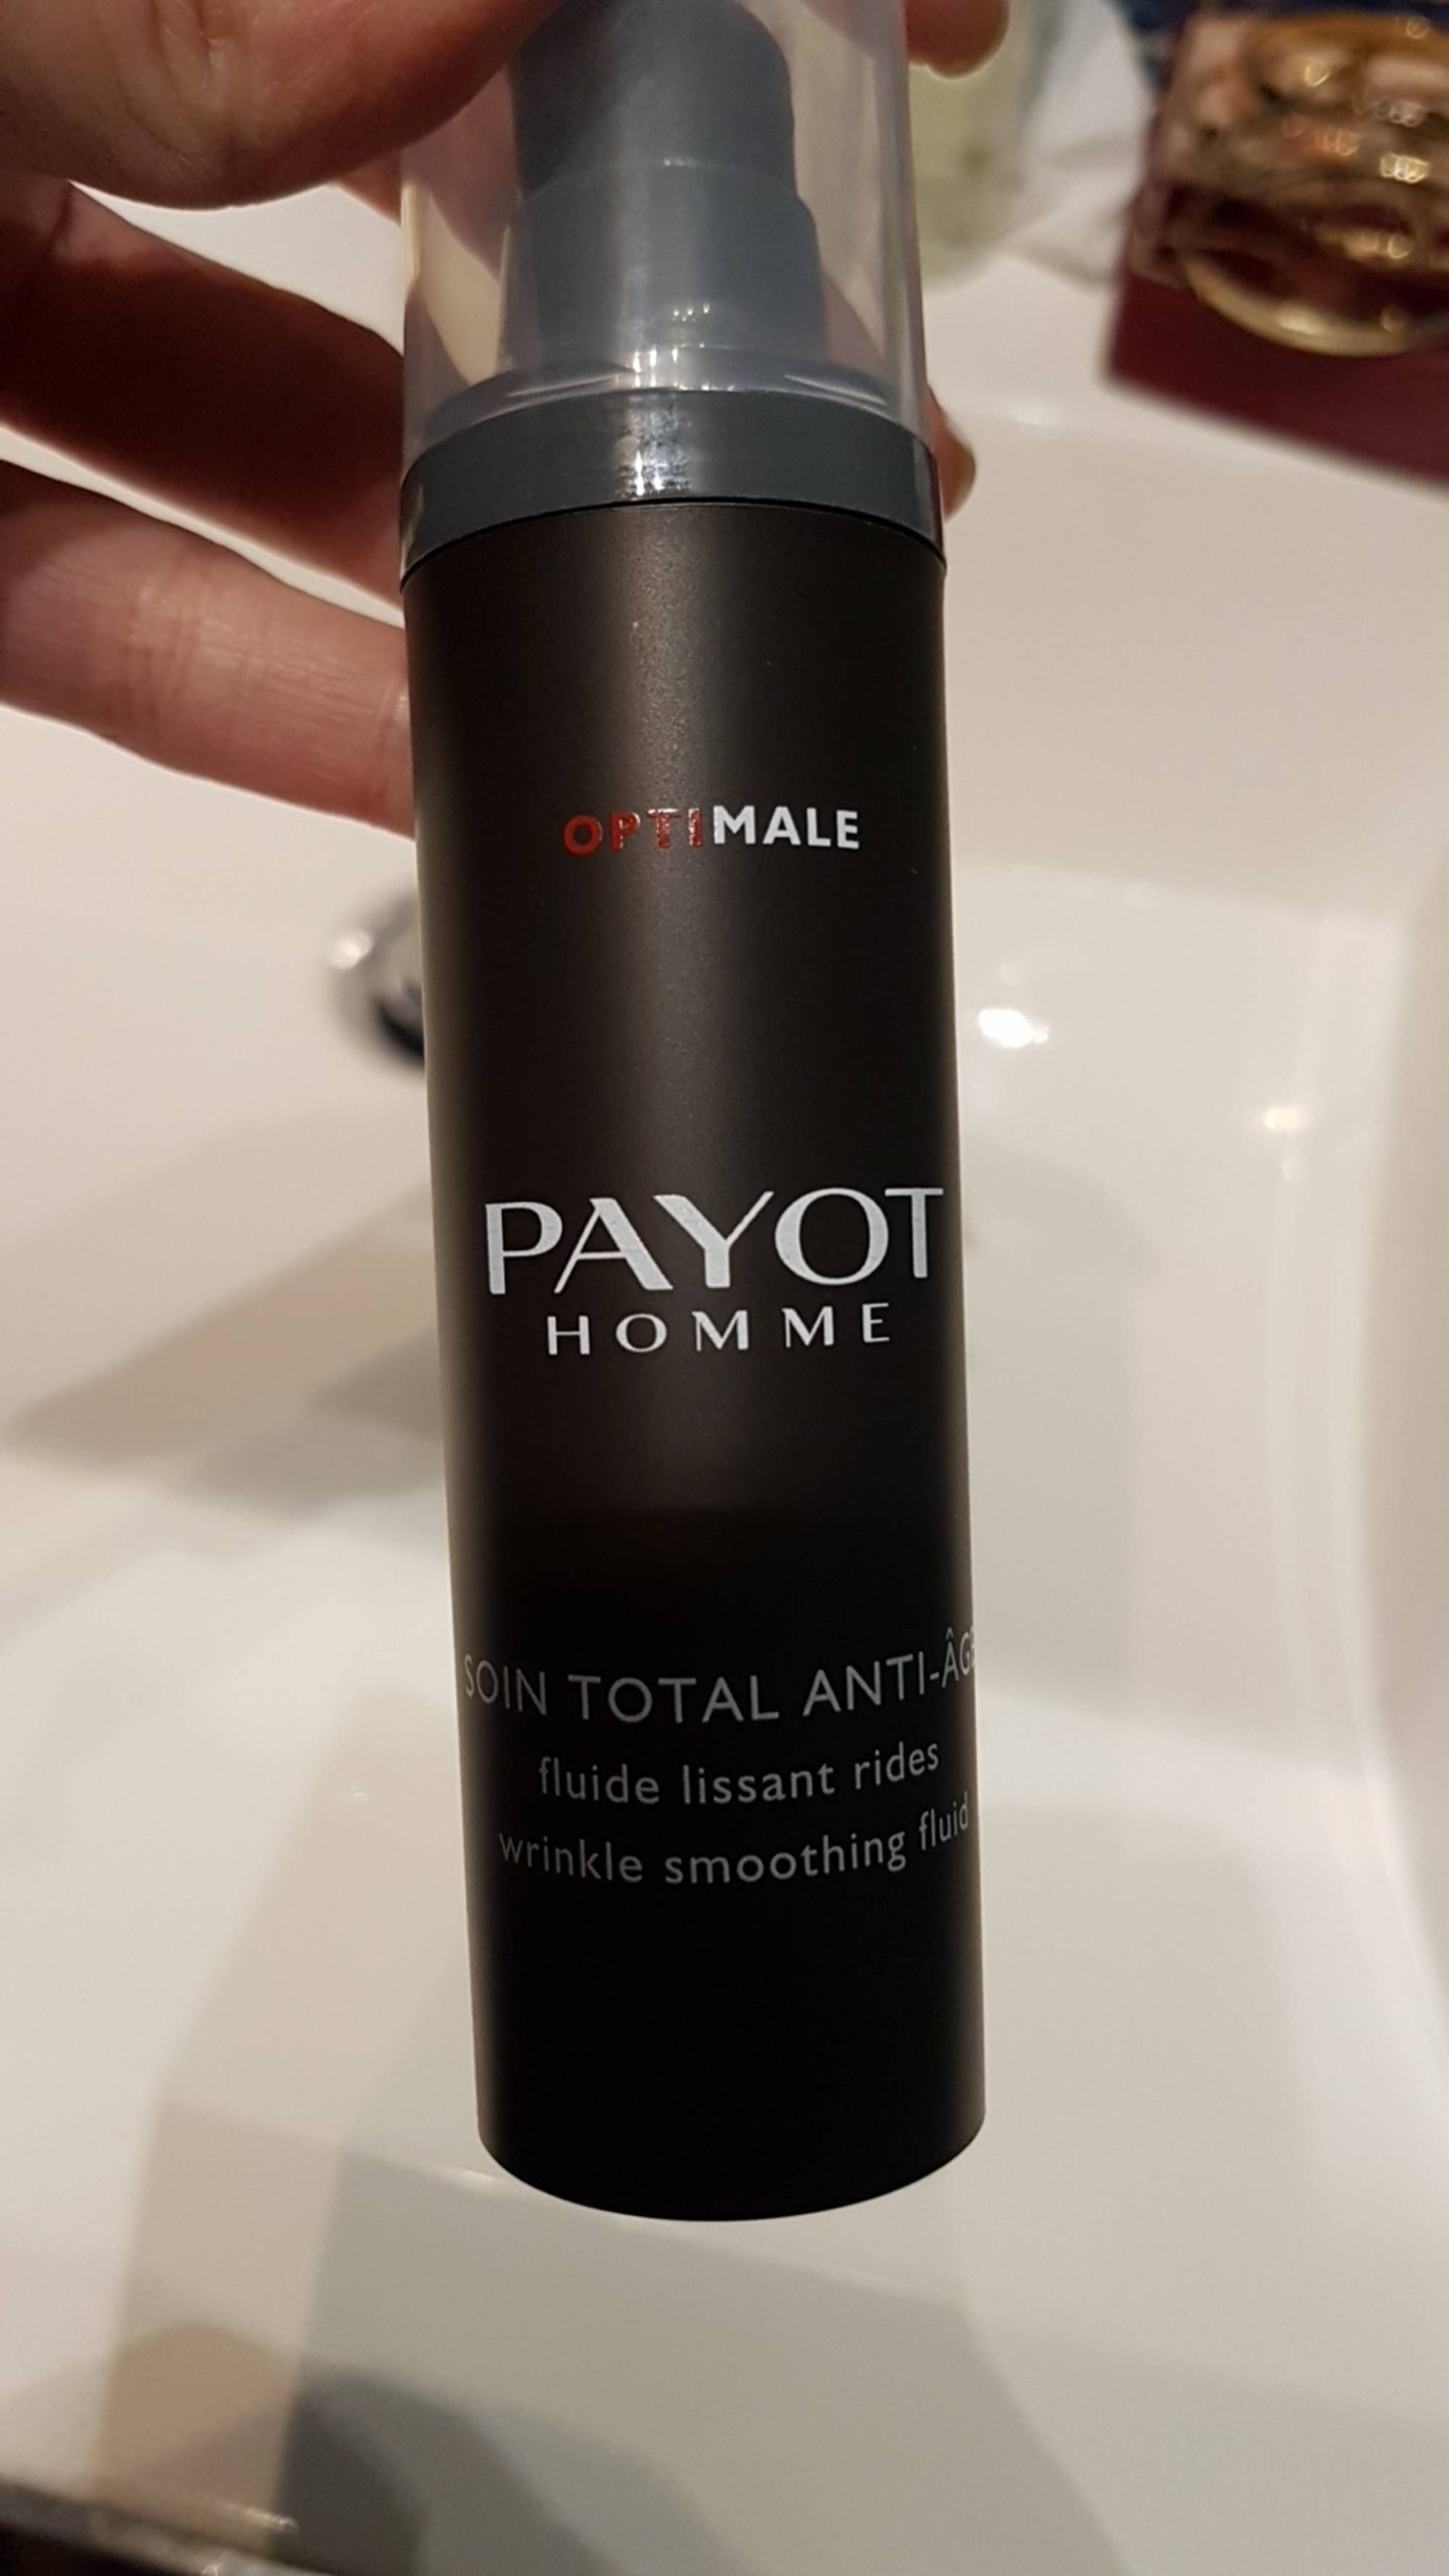 PAYOT - Optimale - Soin total anti-âge homme